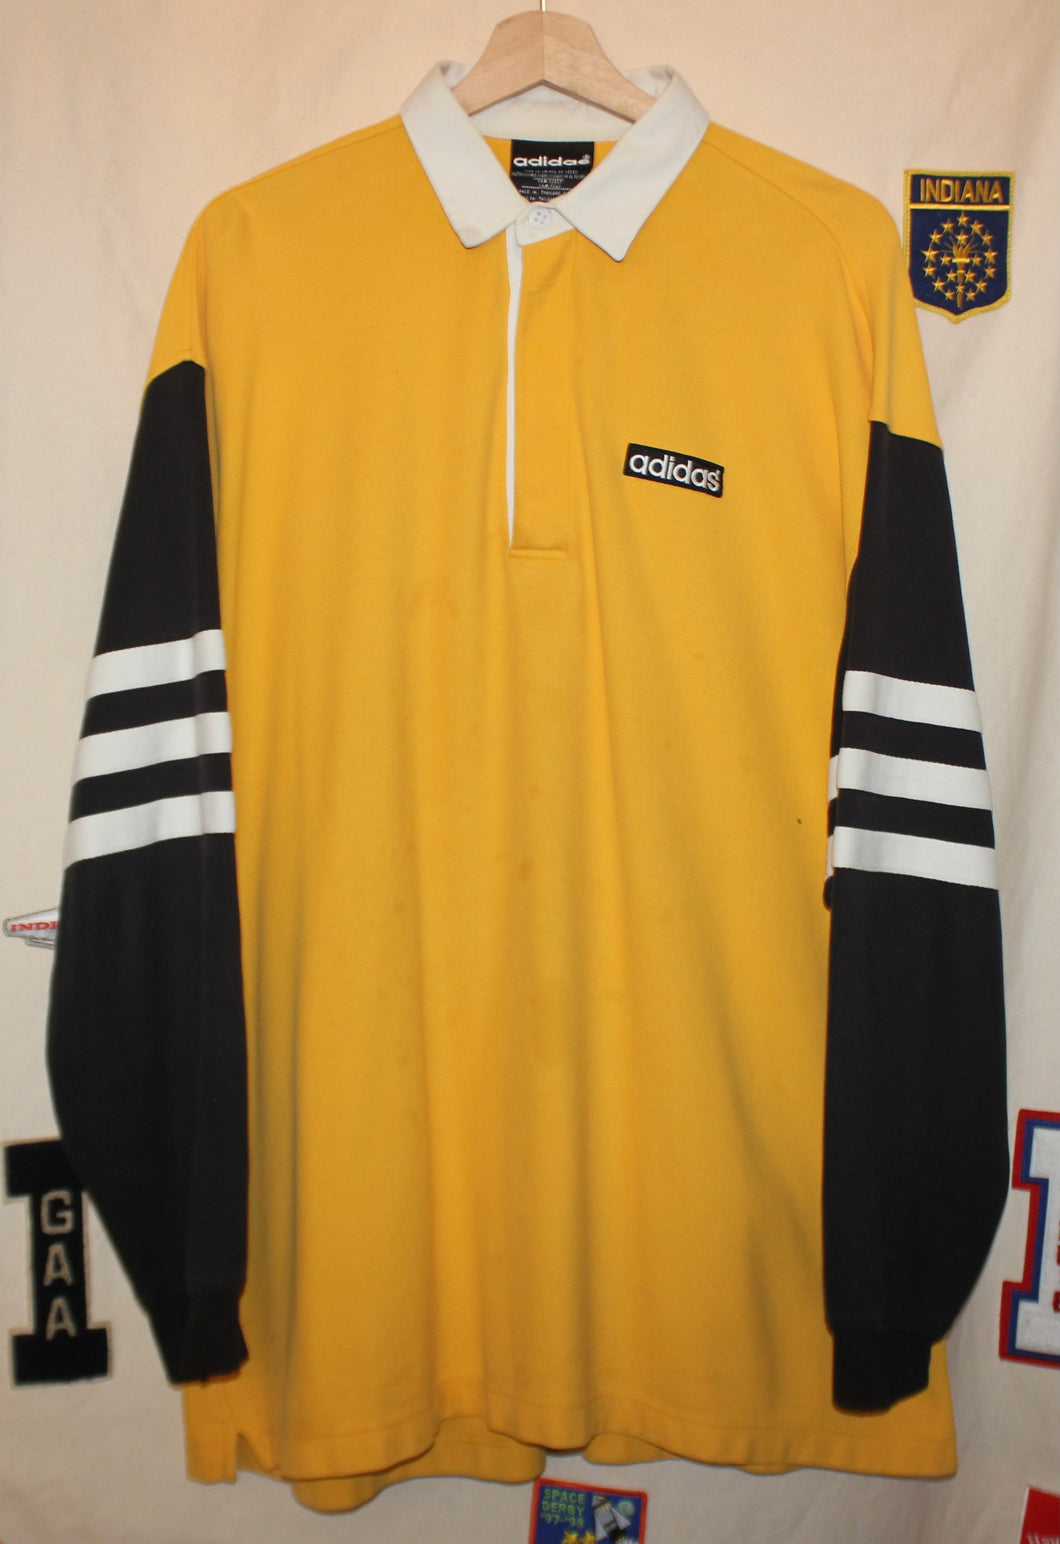 Adidas Rugby Yellow/Black Polo Shirt: Large